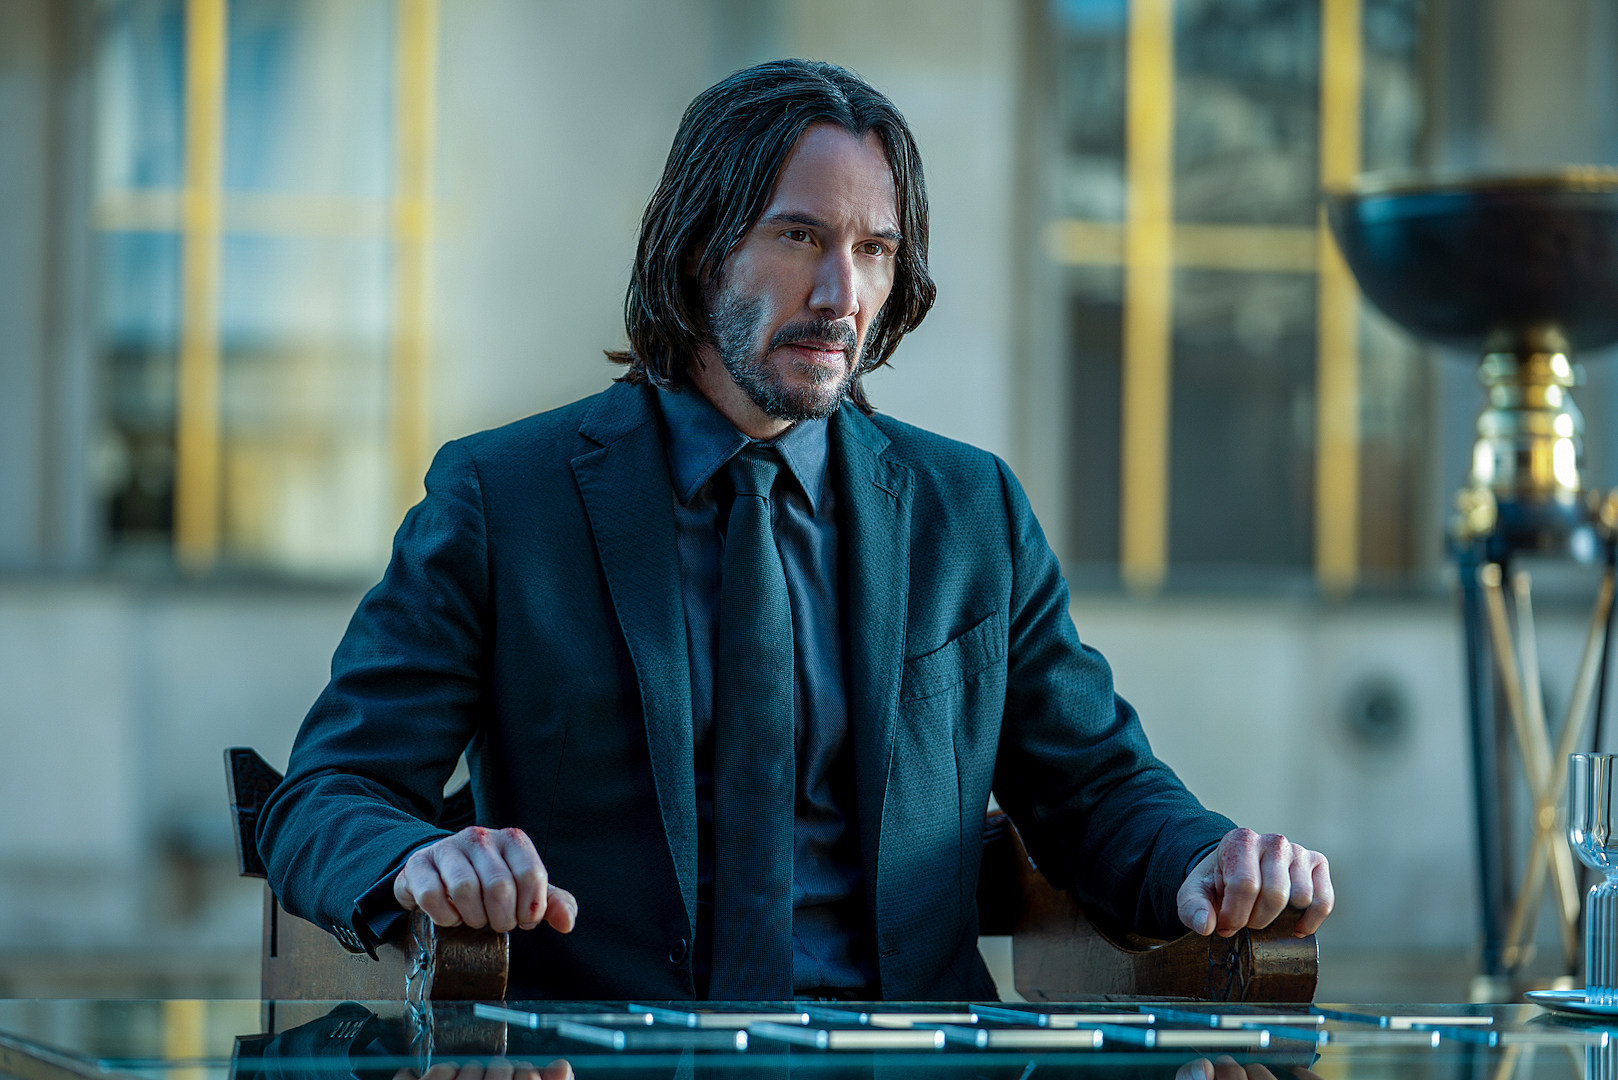 John Wick Chapter 2': Meet the sharp-suited sharpshooters - CNET